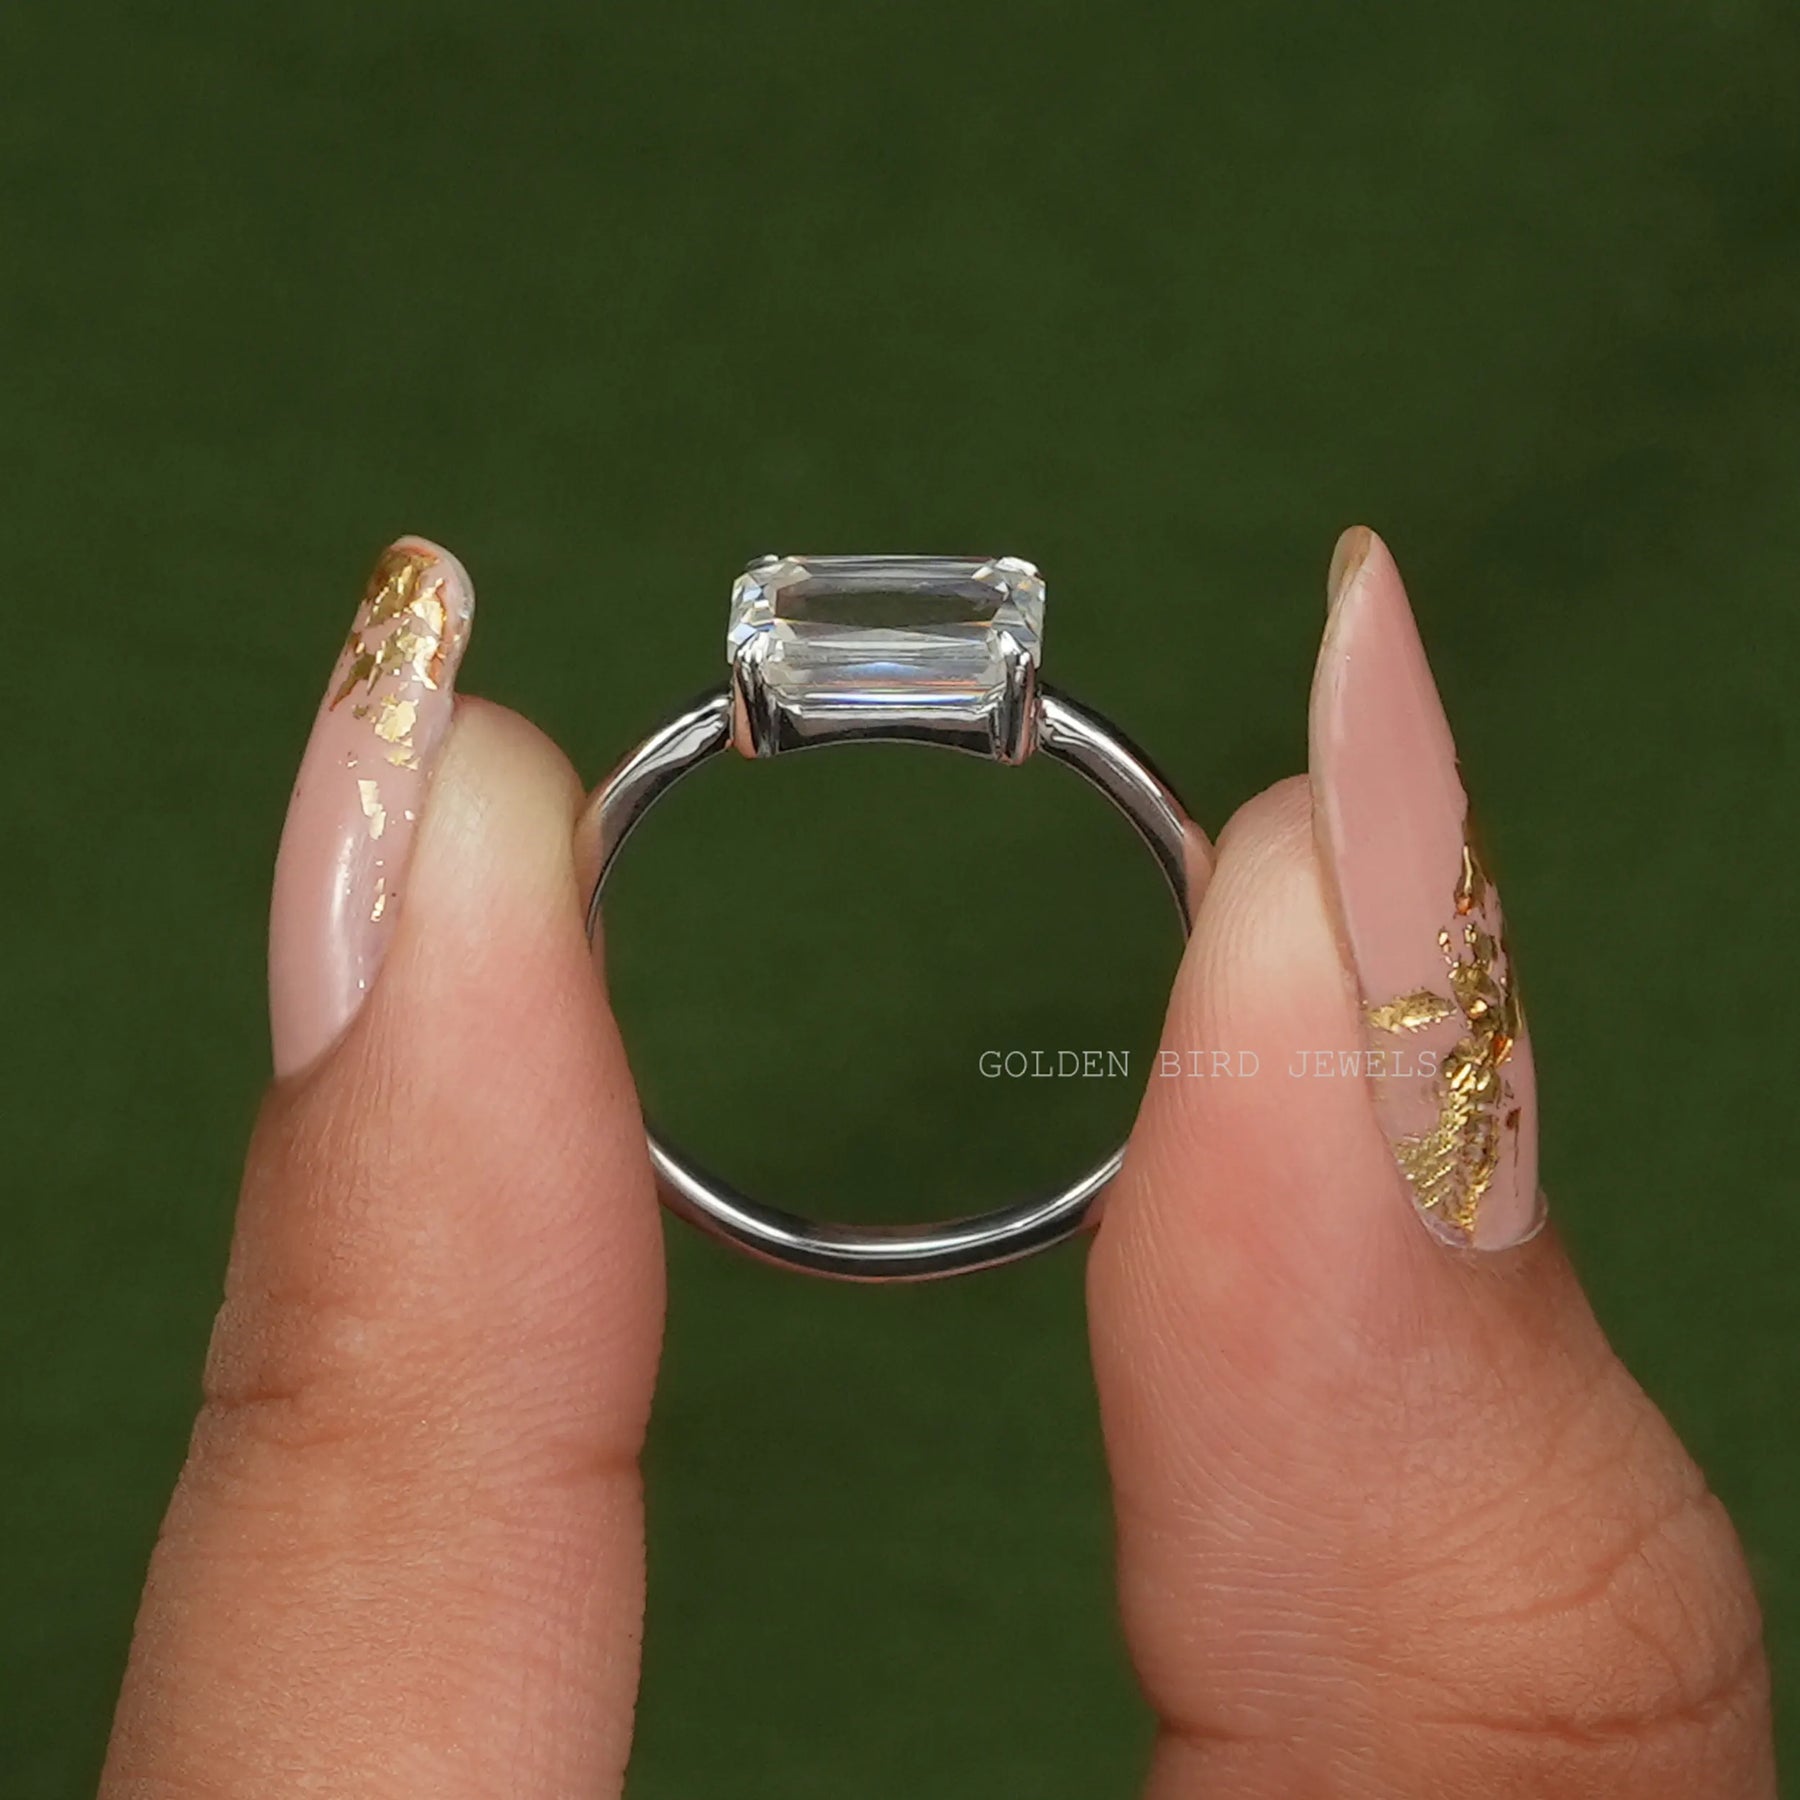 [In two finger front view of portrait cut radiant solitaire ring made of prong setting and white gold]-[Golden Bird Jewels]